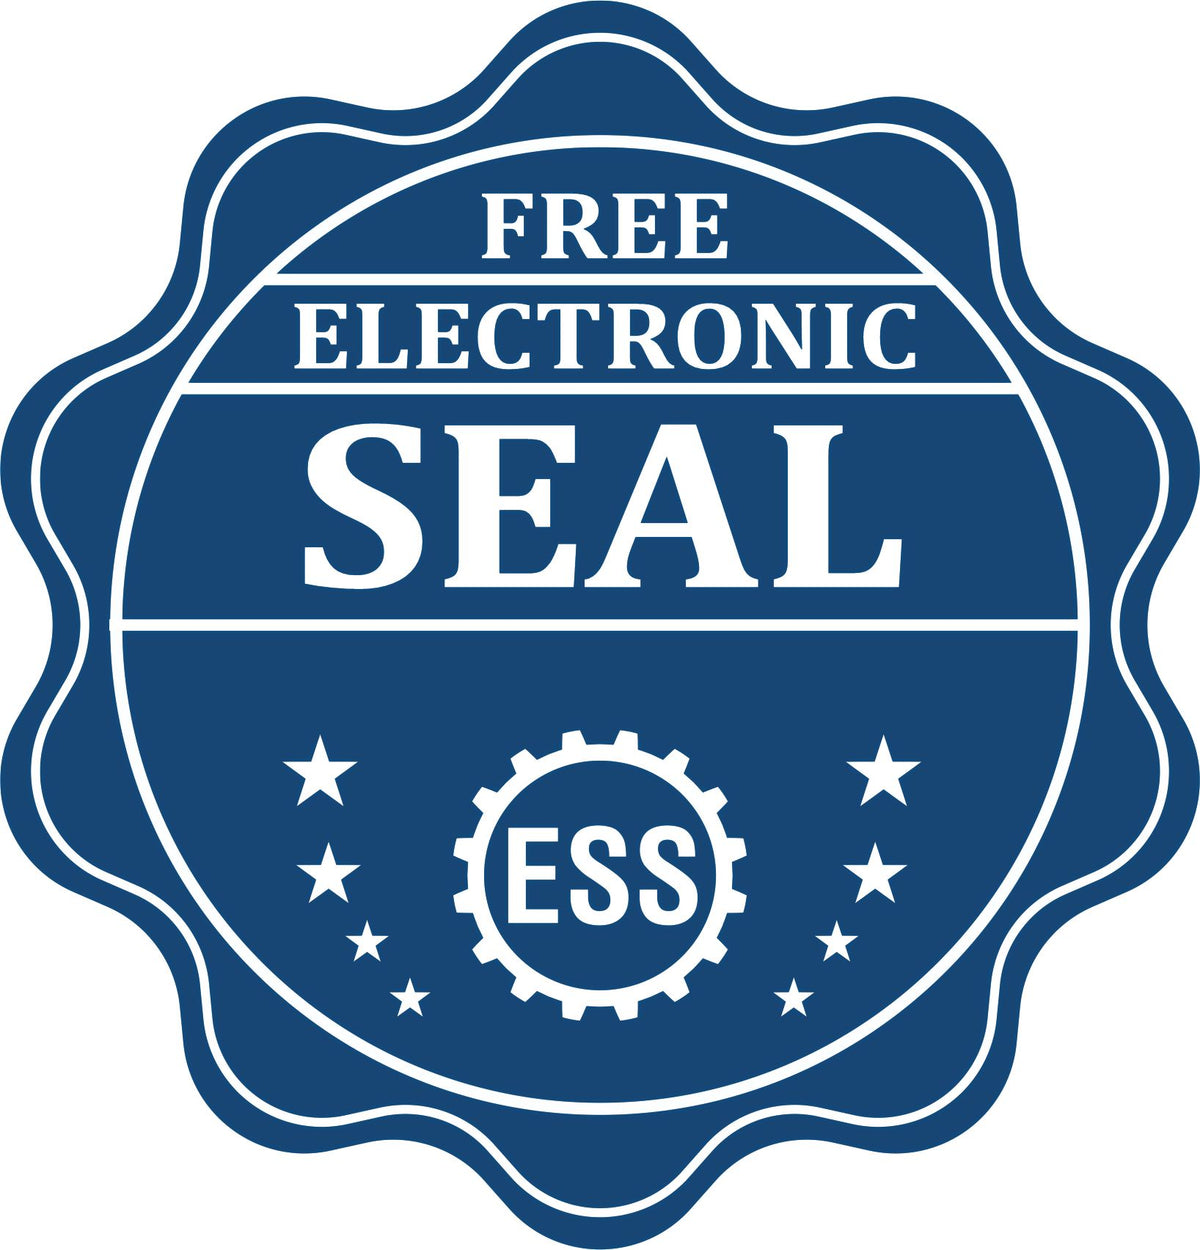 A badge showing a free electronic seal for the PSI Wyoming Notary Stamp with stars and the ESS gear on the emblem.